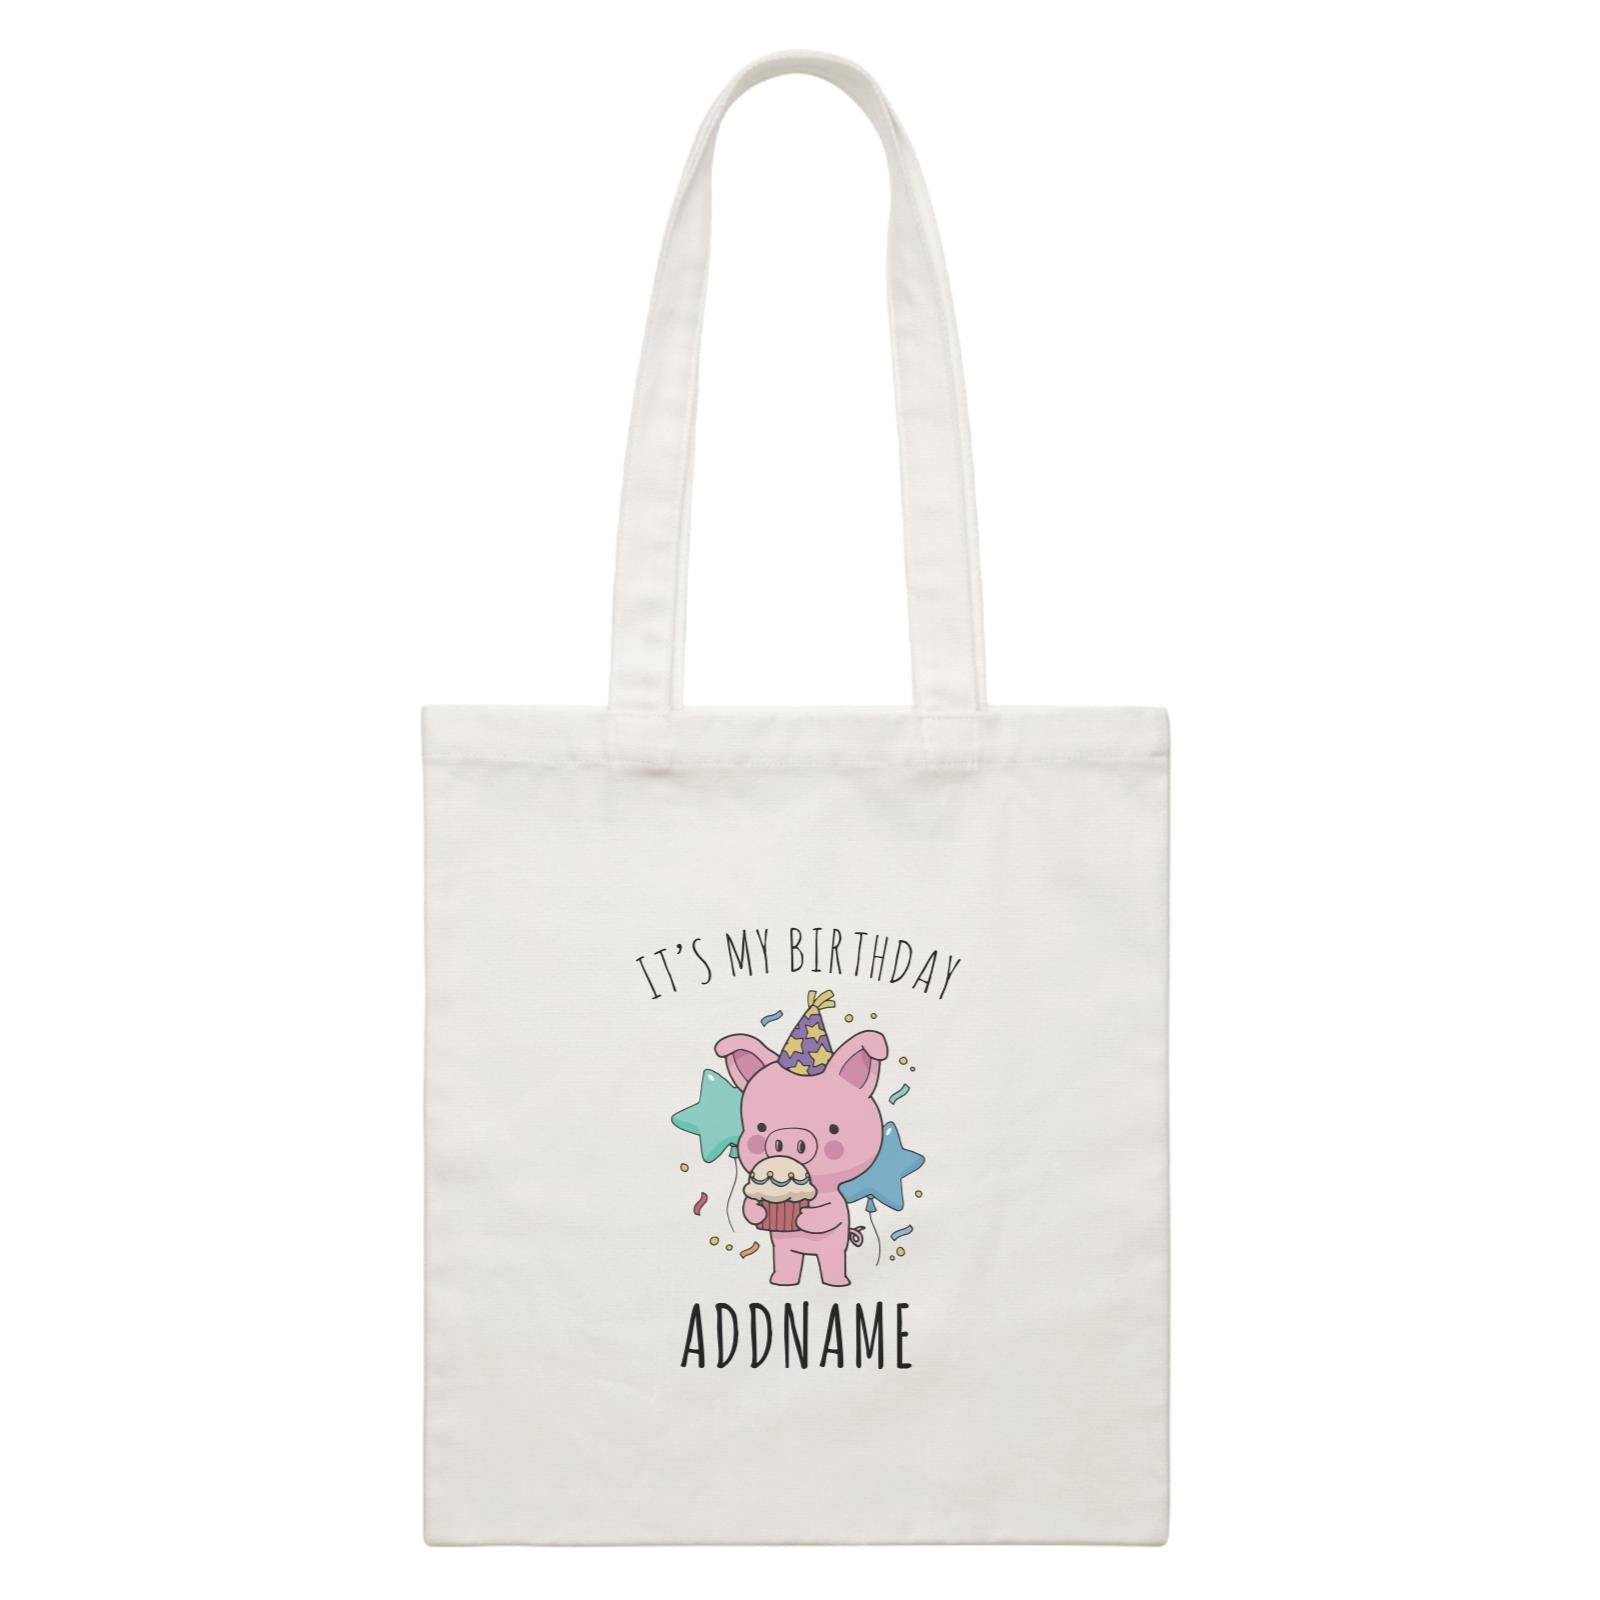 Birthday Sketch Animals Pig with Party Hat Eating Cupcake It's My Birthday Addname White Canvas Bag